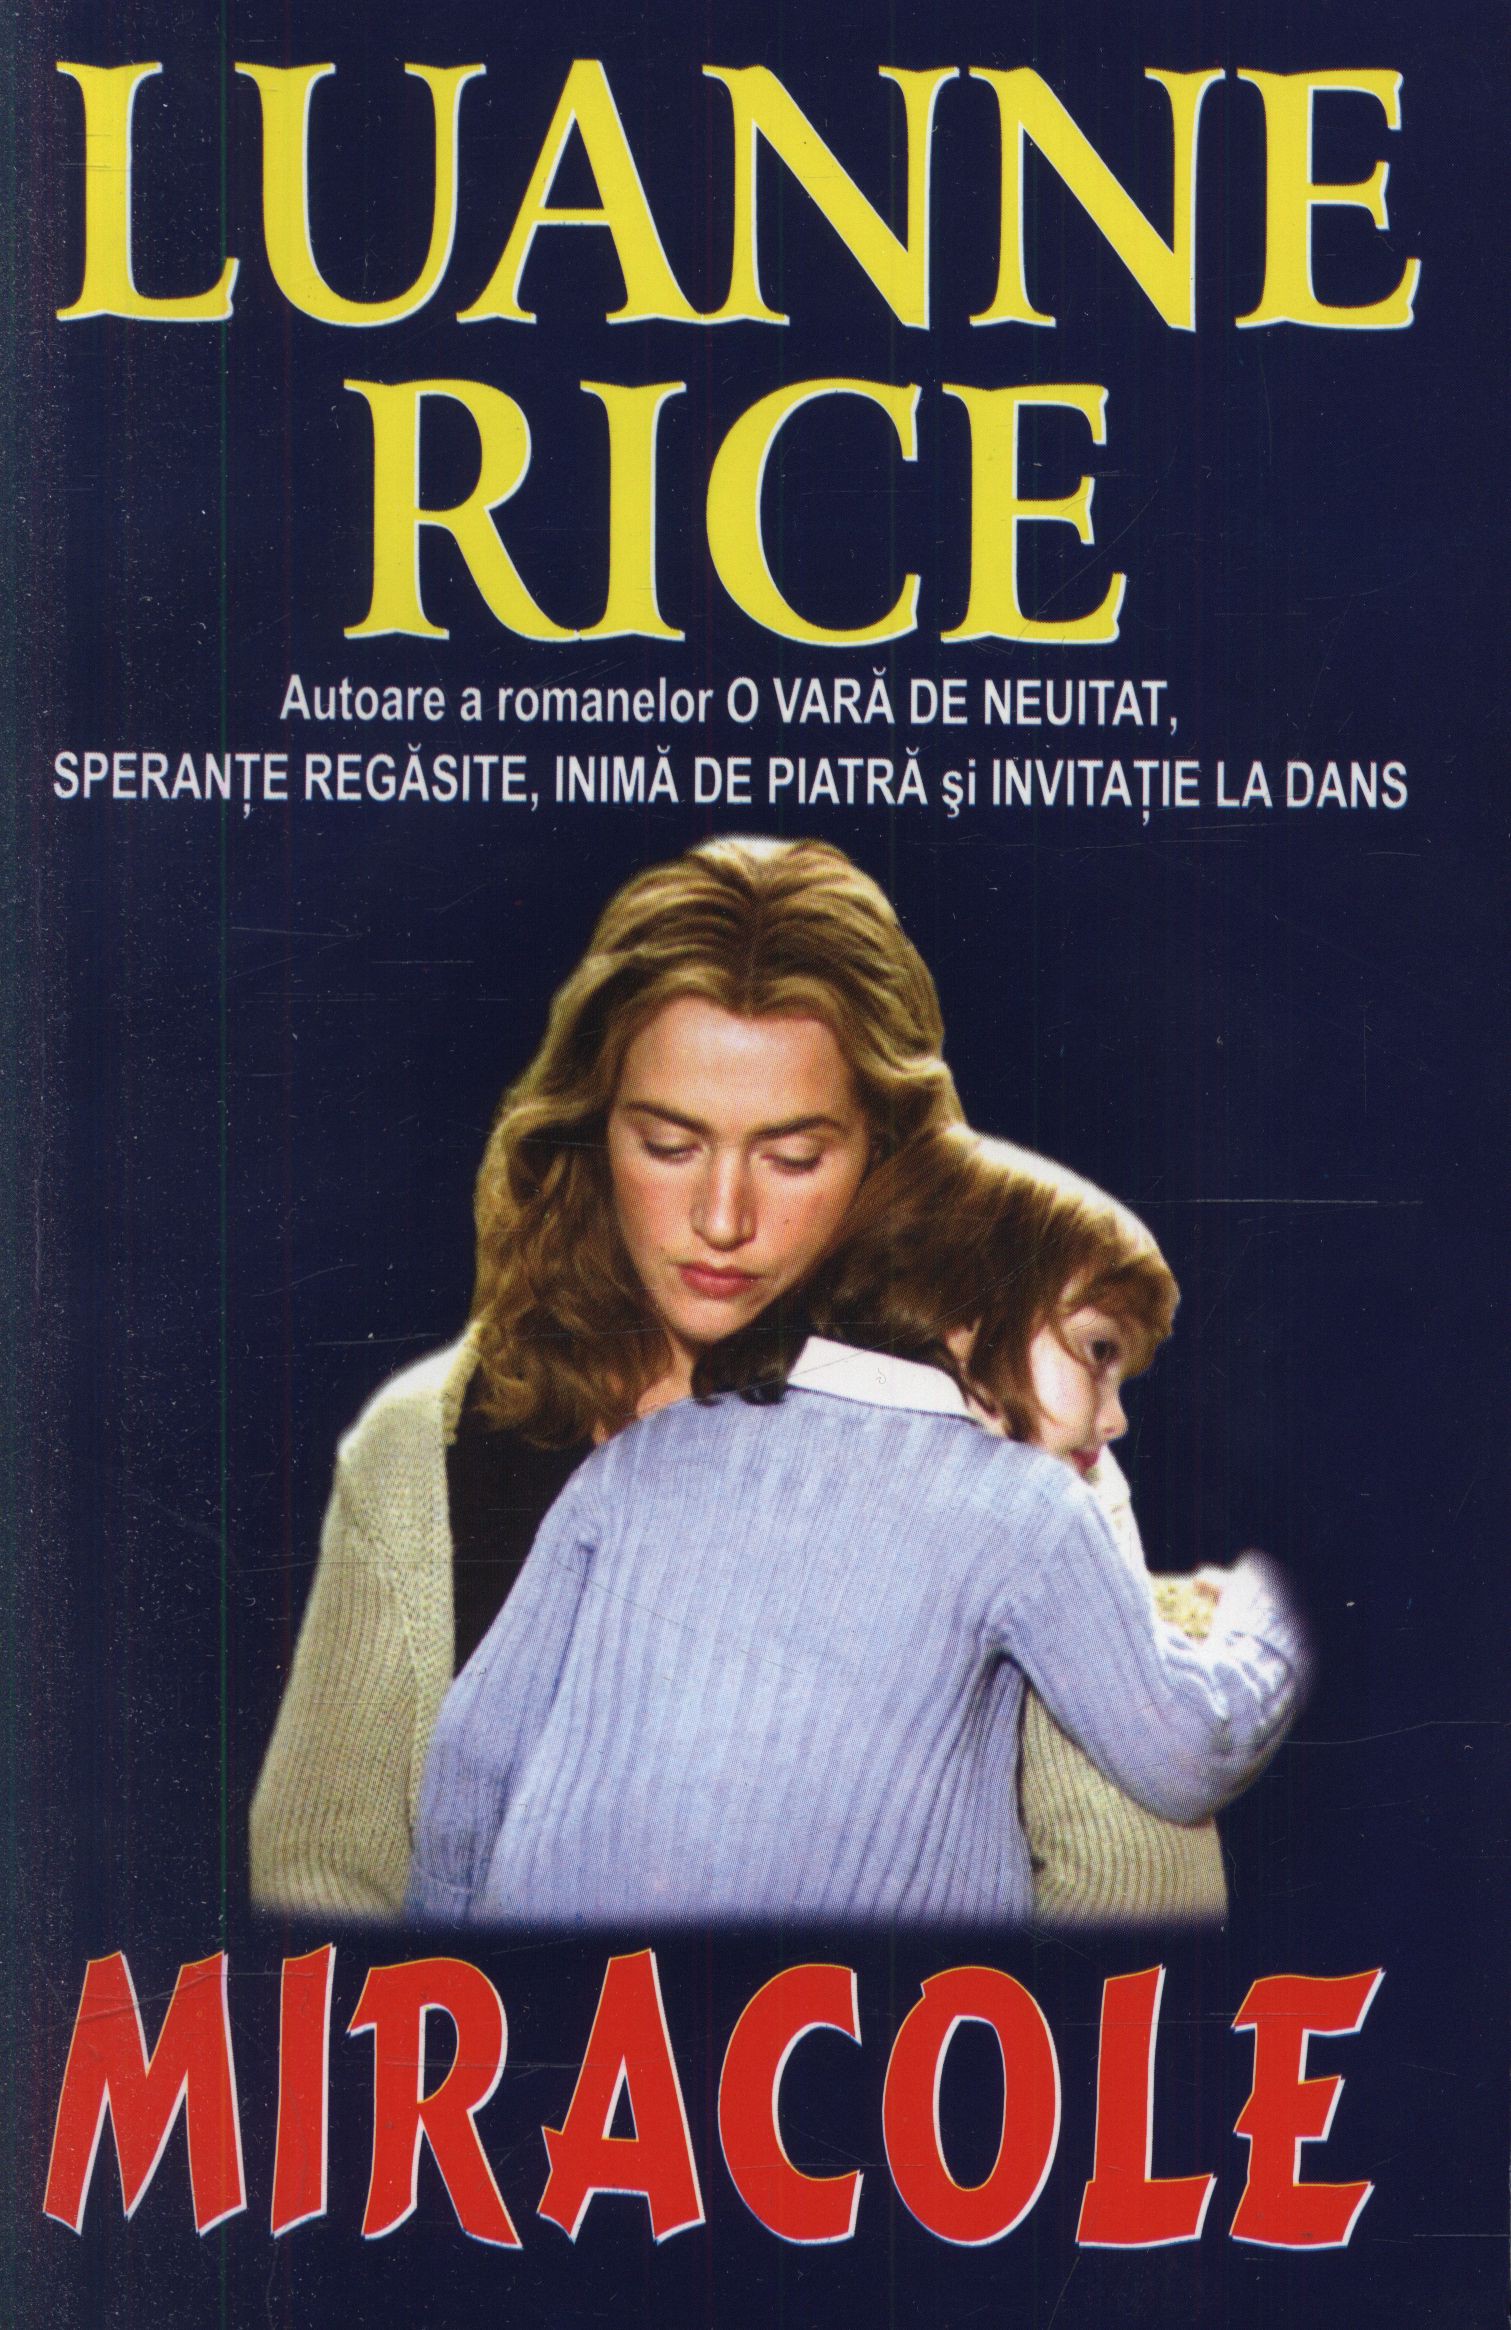 Miracole - Luanne Rice